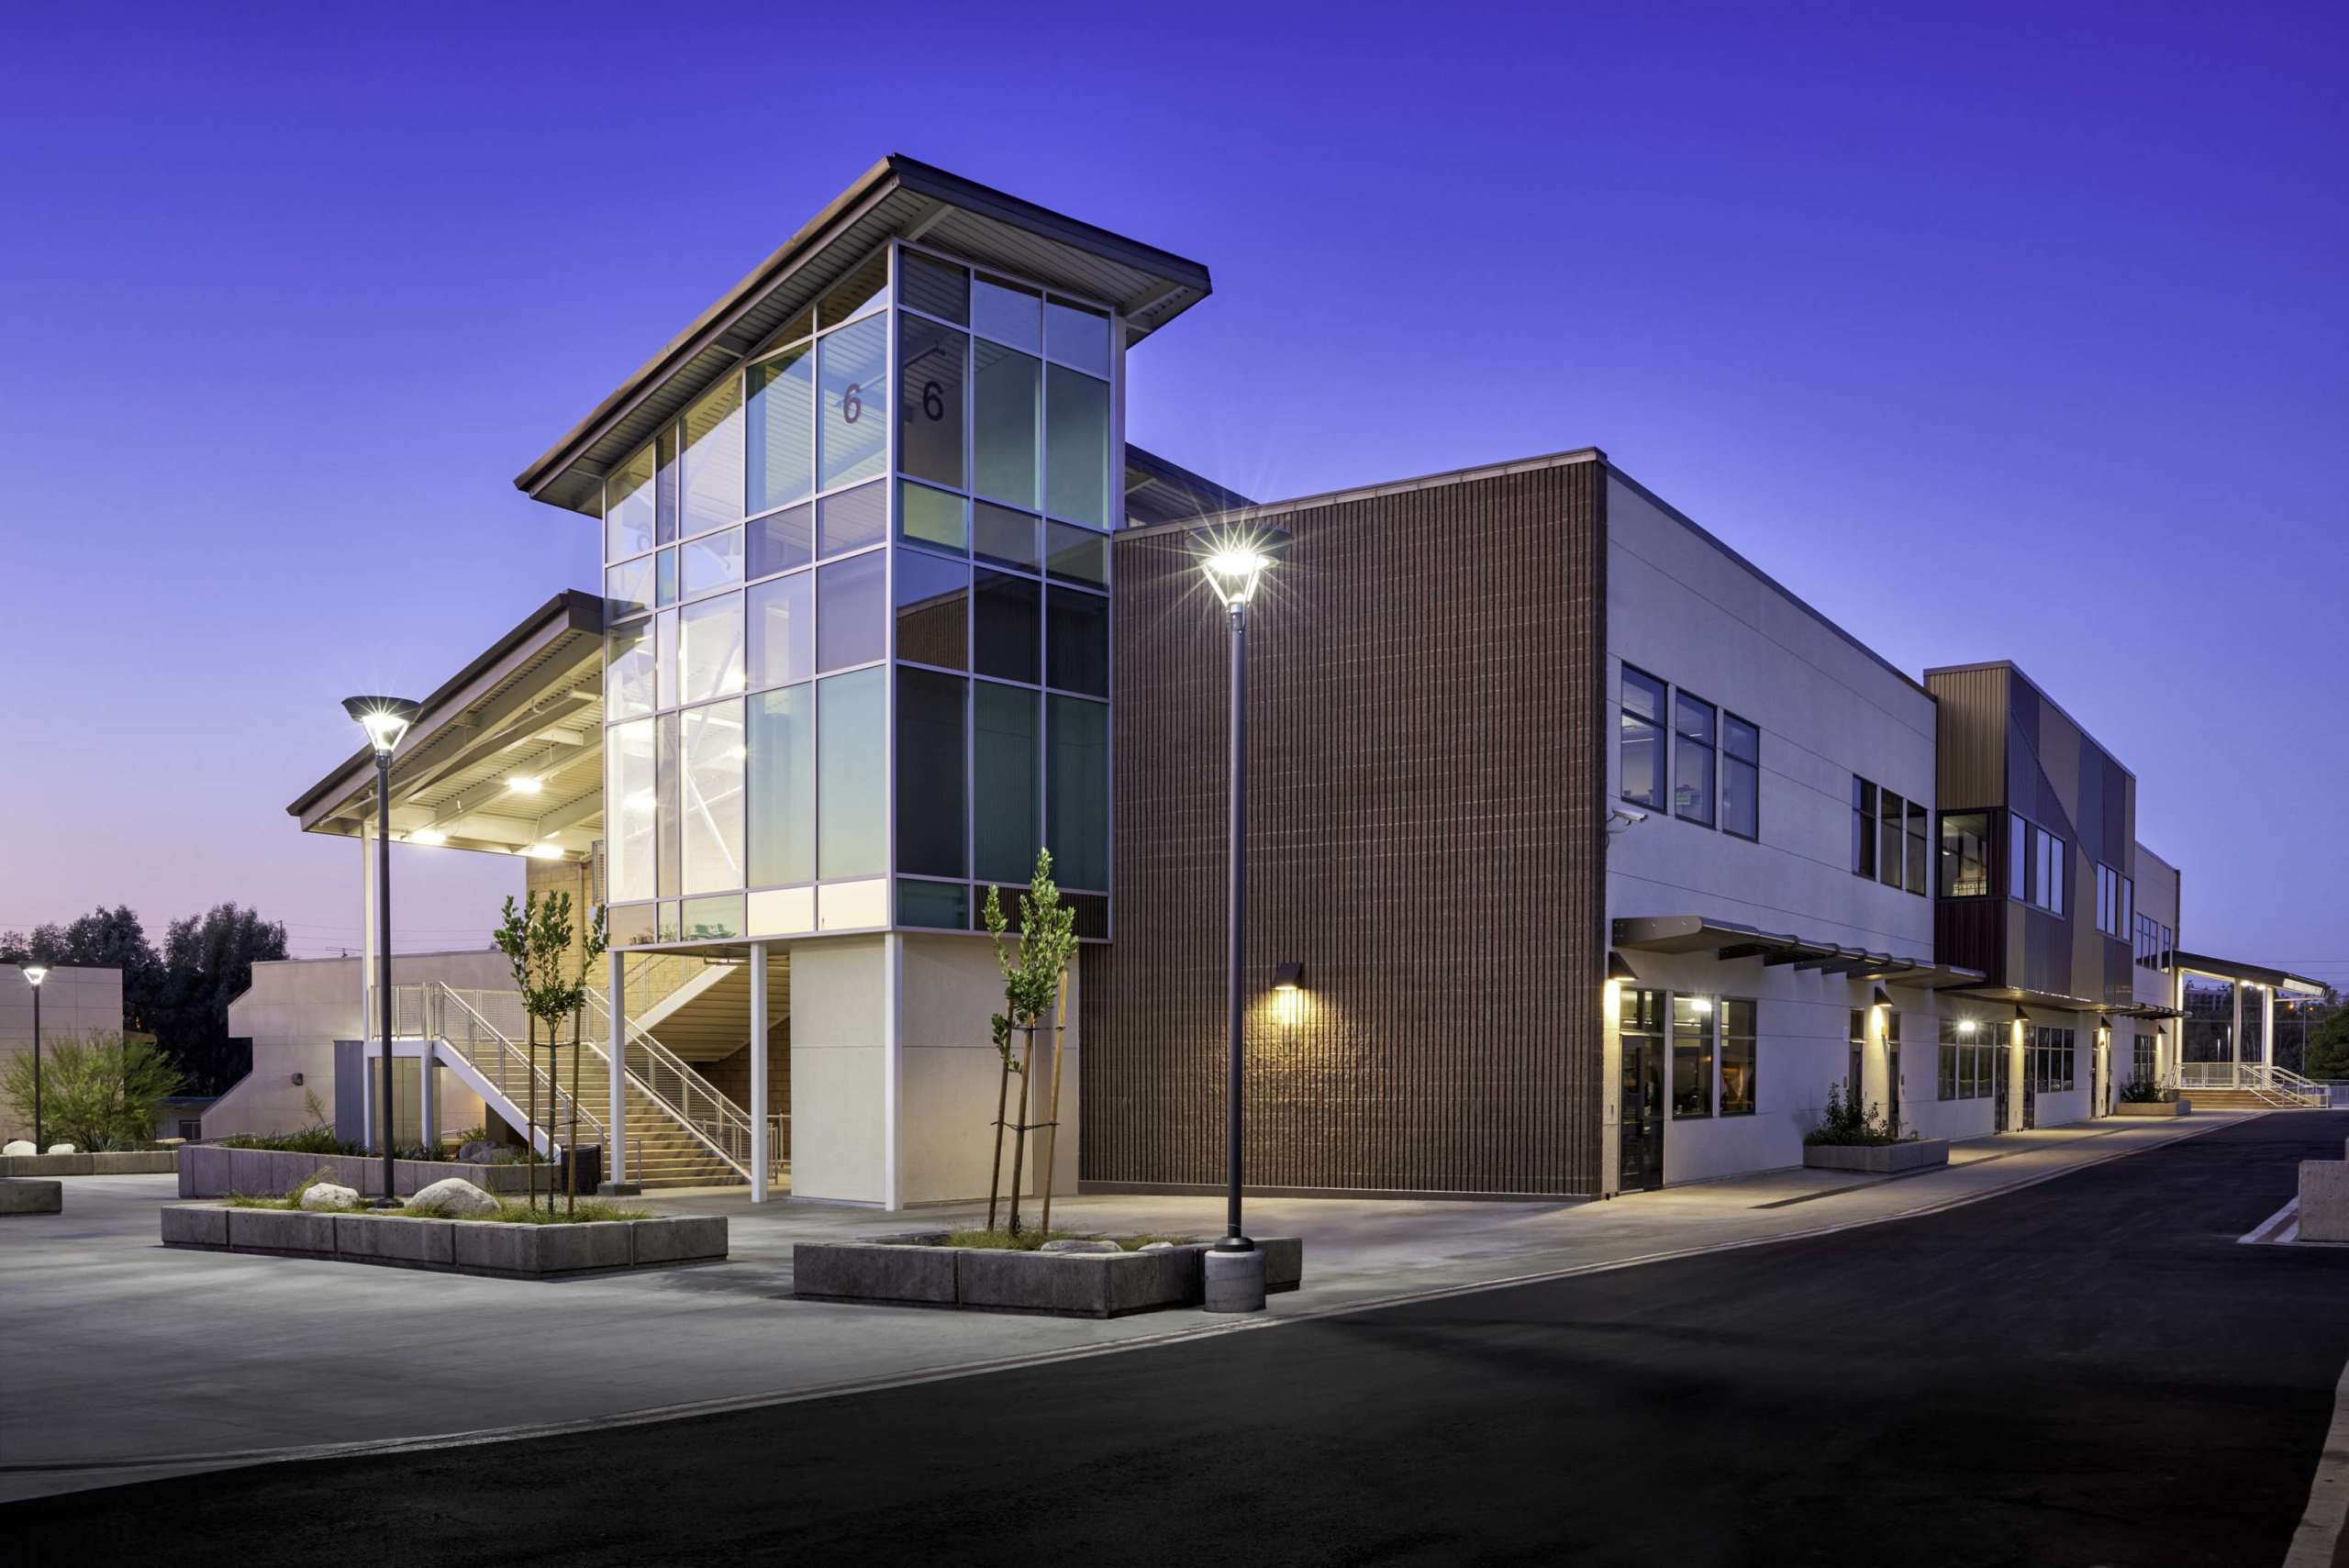 Nighttime outdoor view of illuminated Temecula Valley High School